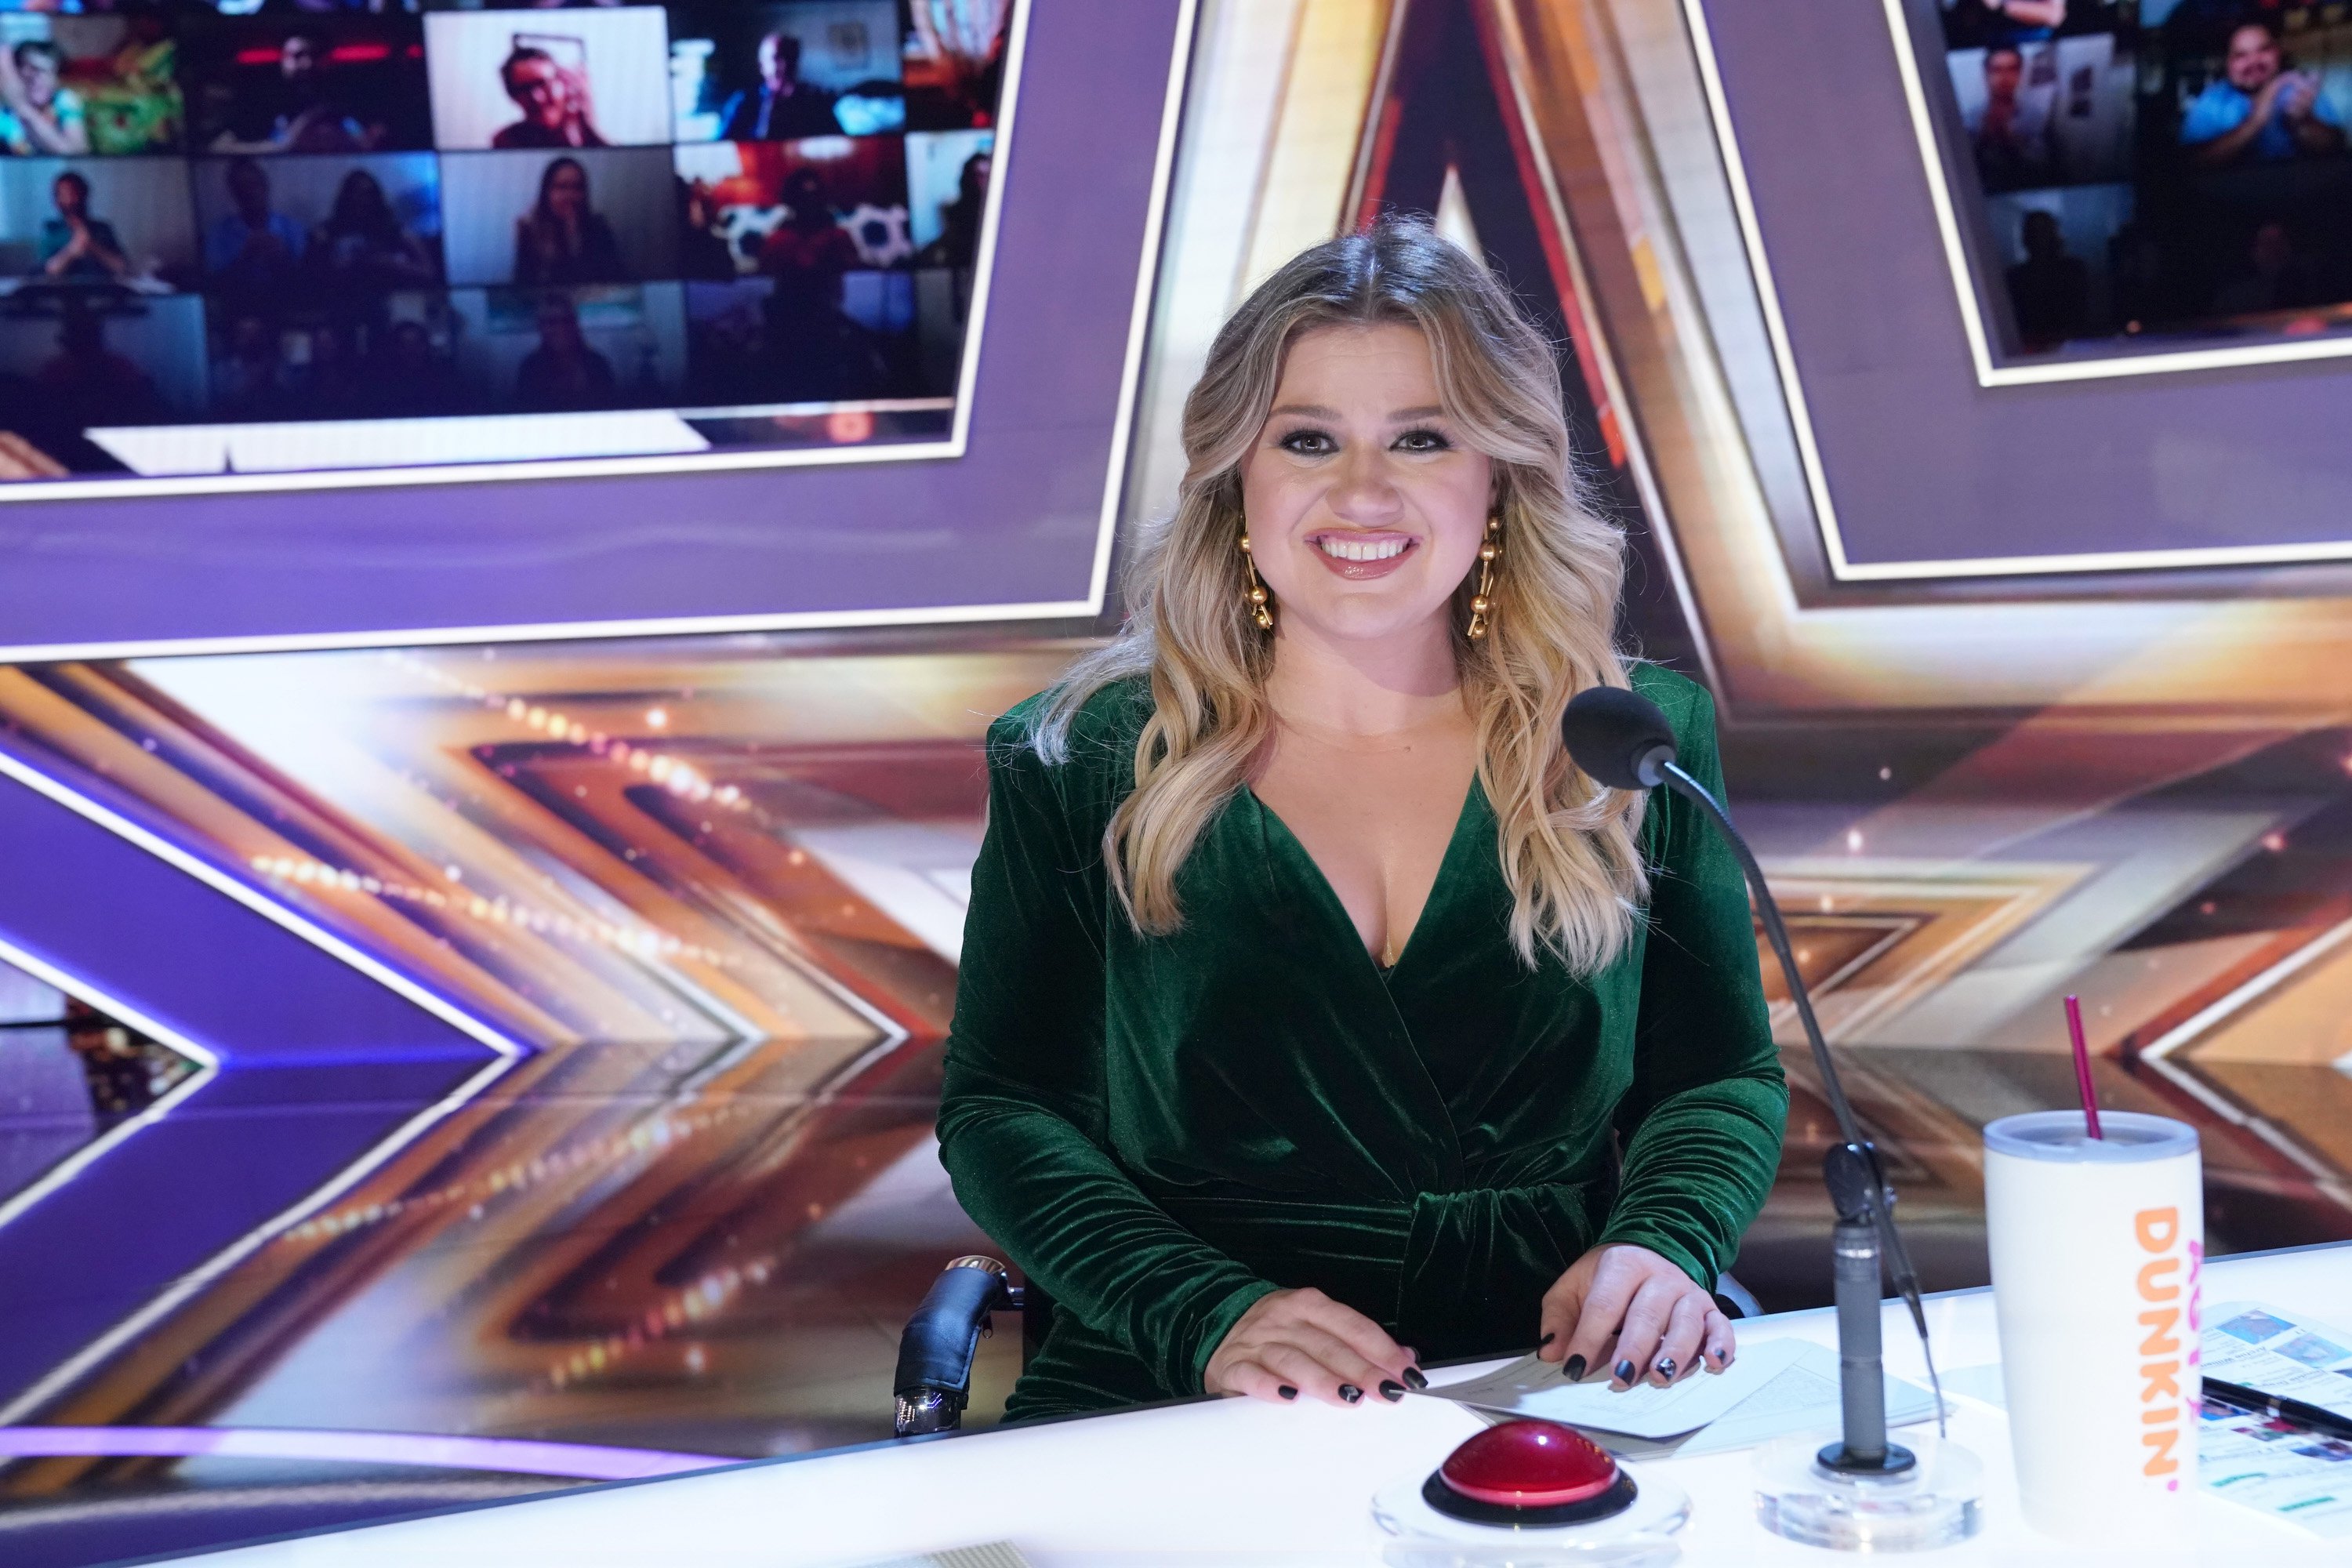 Kelly Clarkson serving as a guest judge on "America's Got Talent" on August 11, 2020. | Photo: Getty Images.